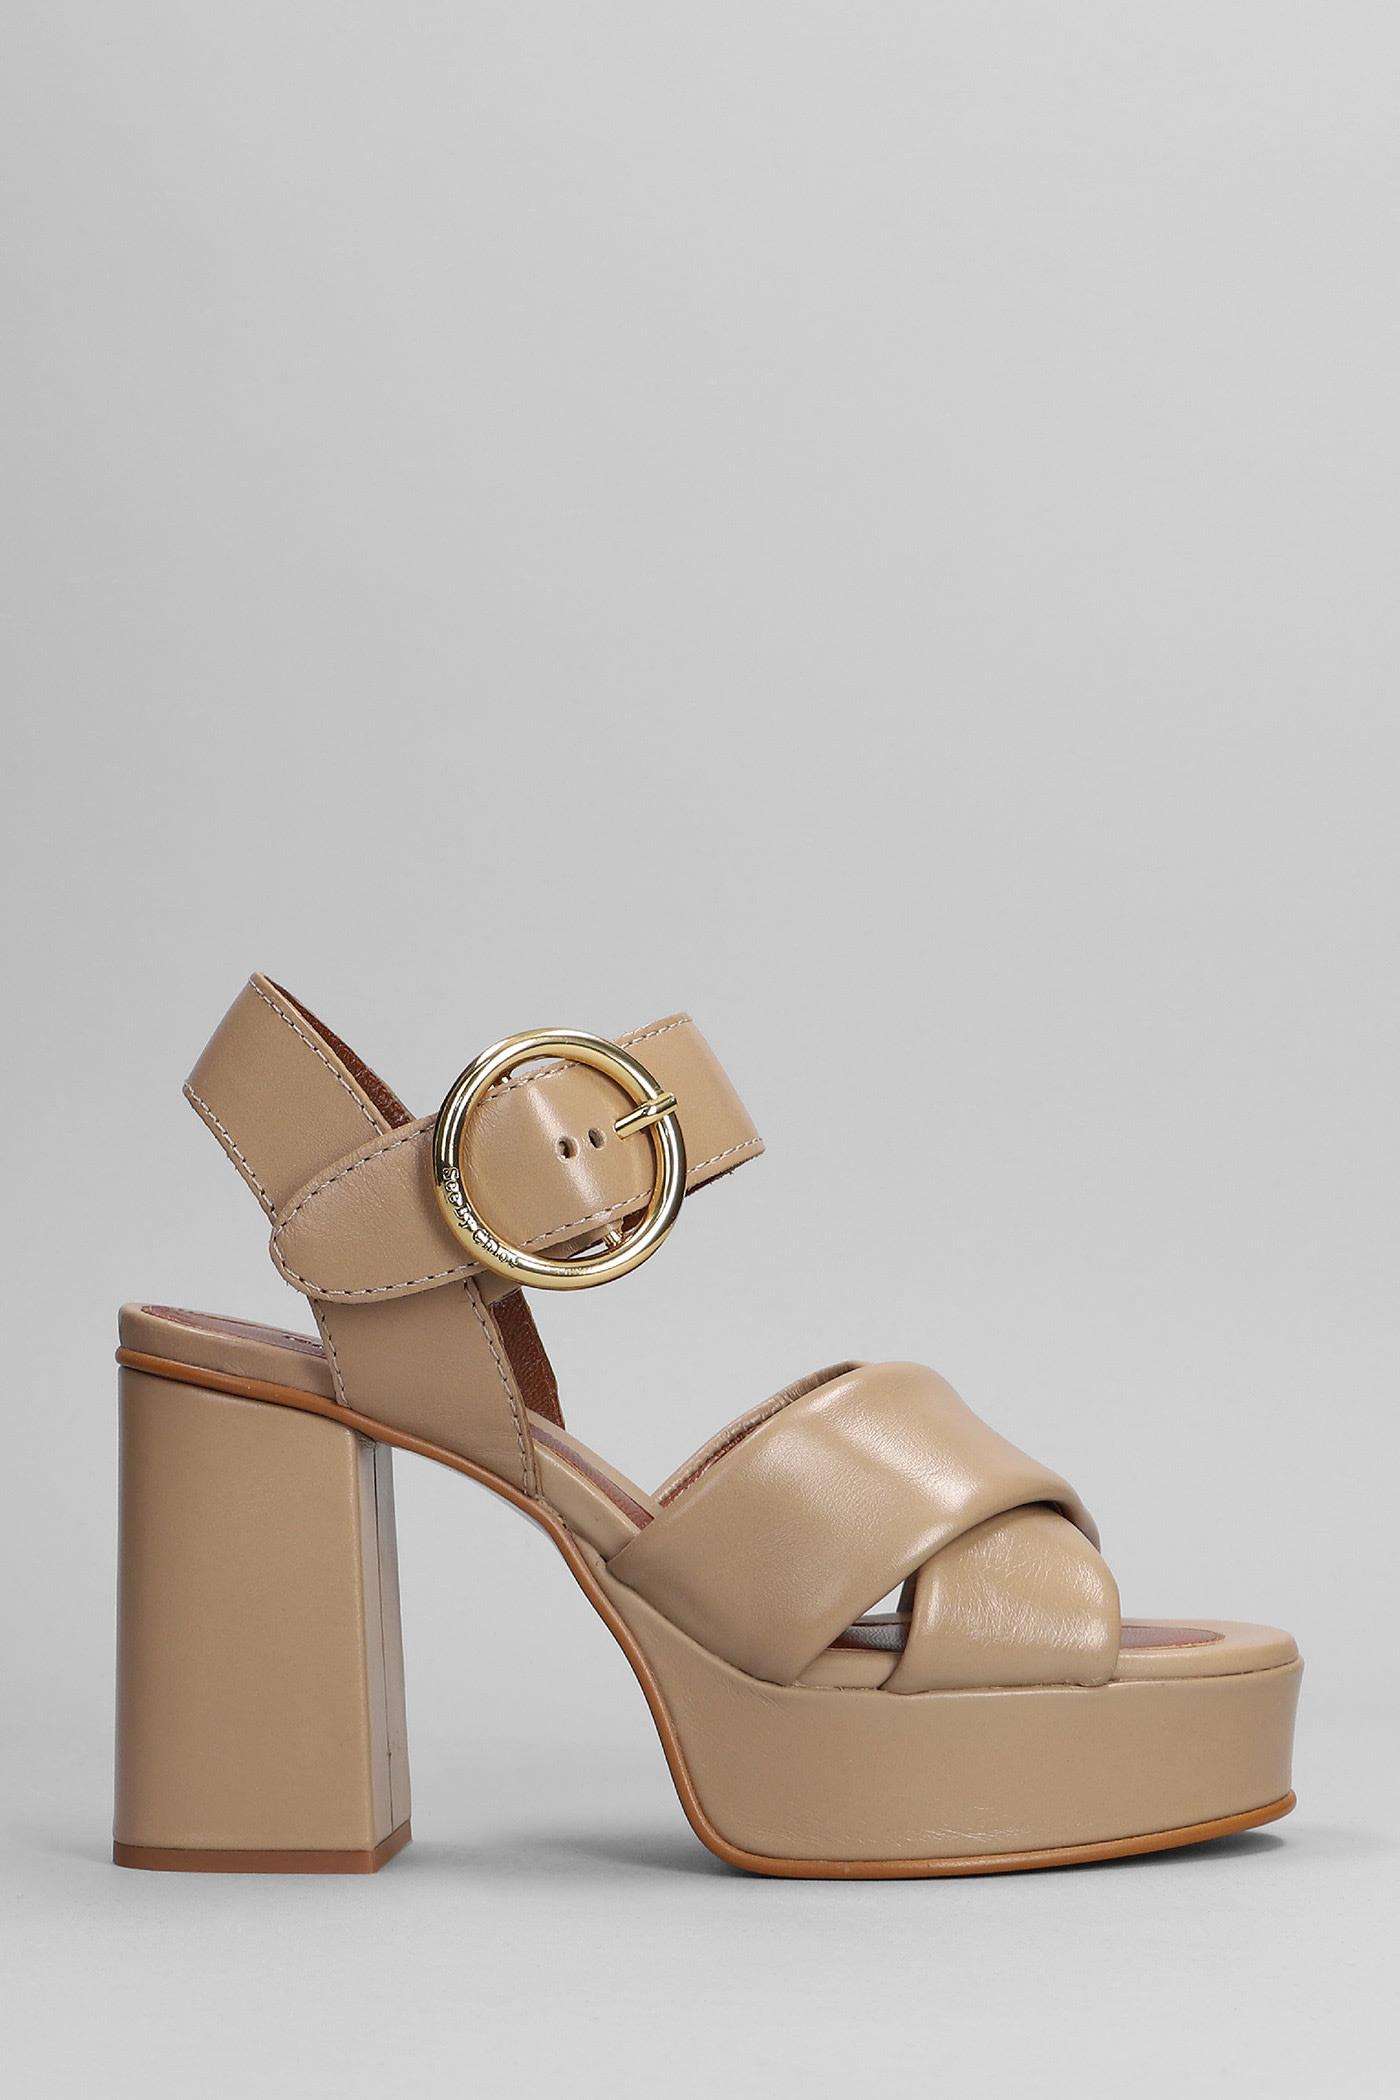 Chloé Lyna Sandals In Beige Leather Natural | Lyst